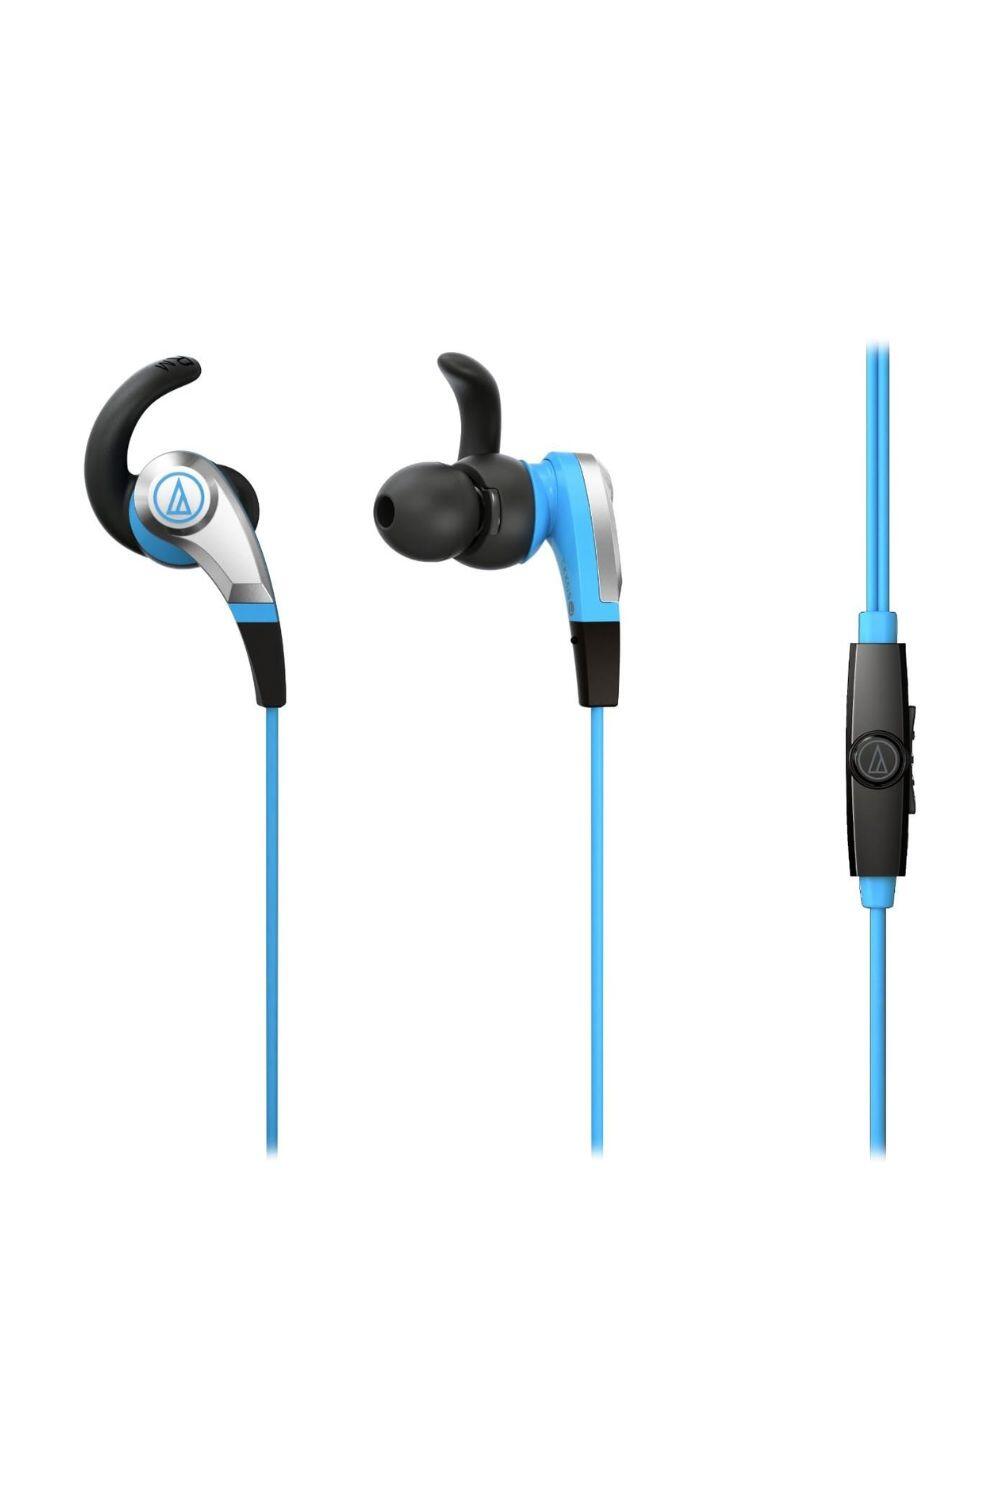 AUDIO TECHNICA Audio-Technica ATH-CKX5iS In-Ear Headphones With Mic